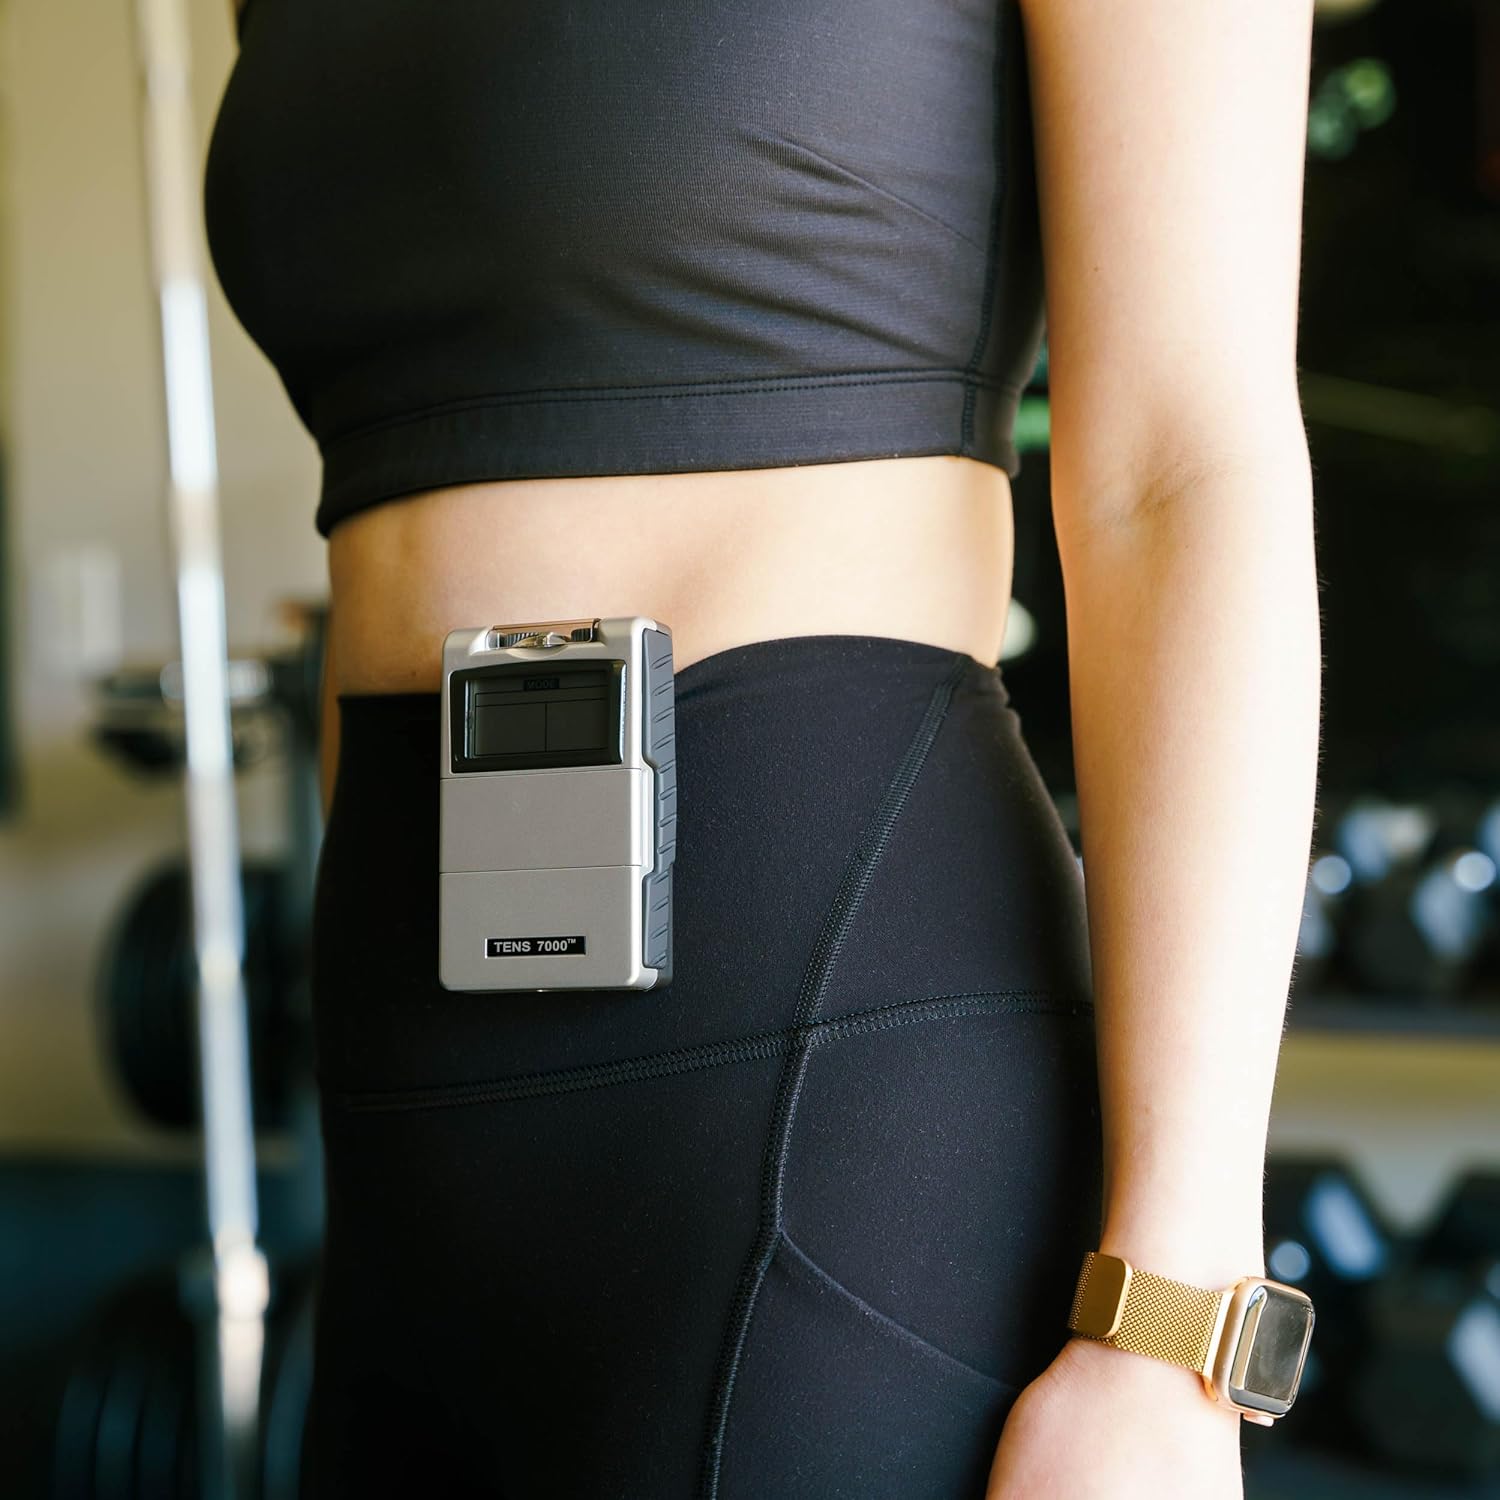 A TENS unit clipped to a woman's pants